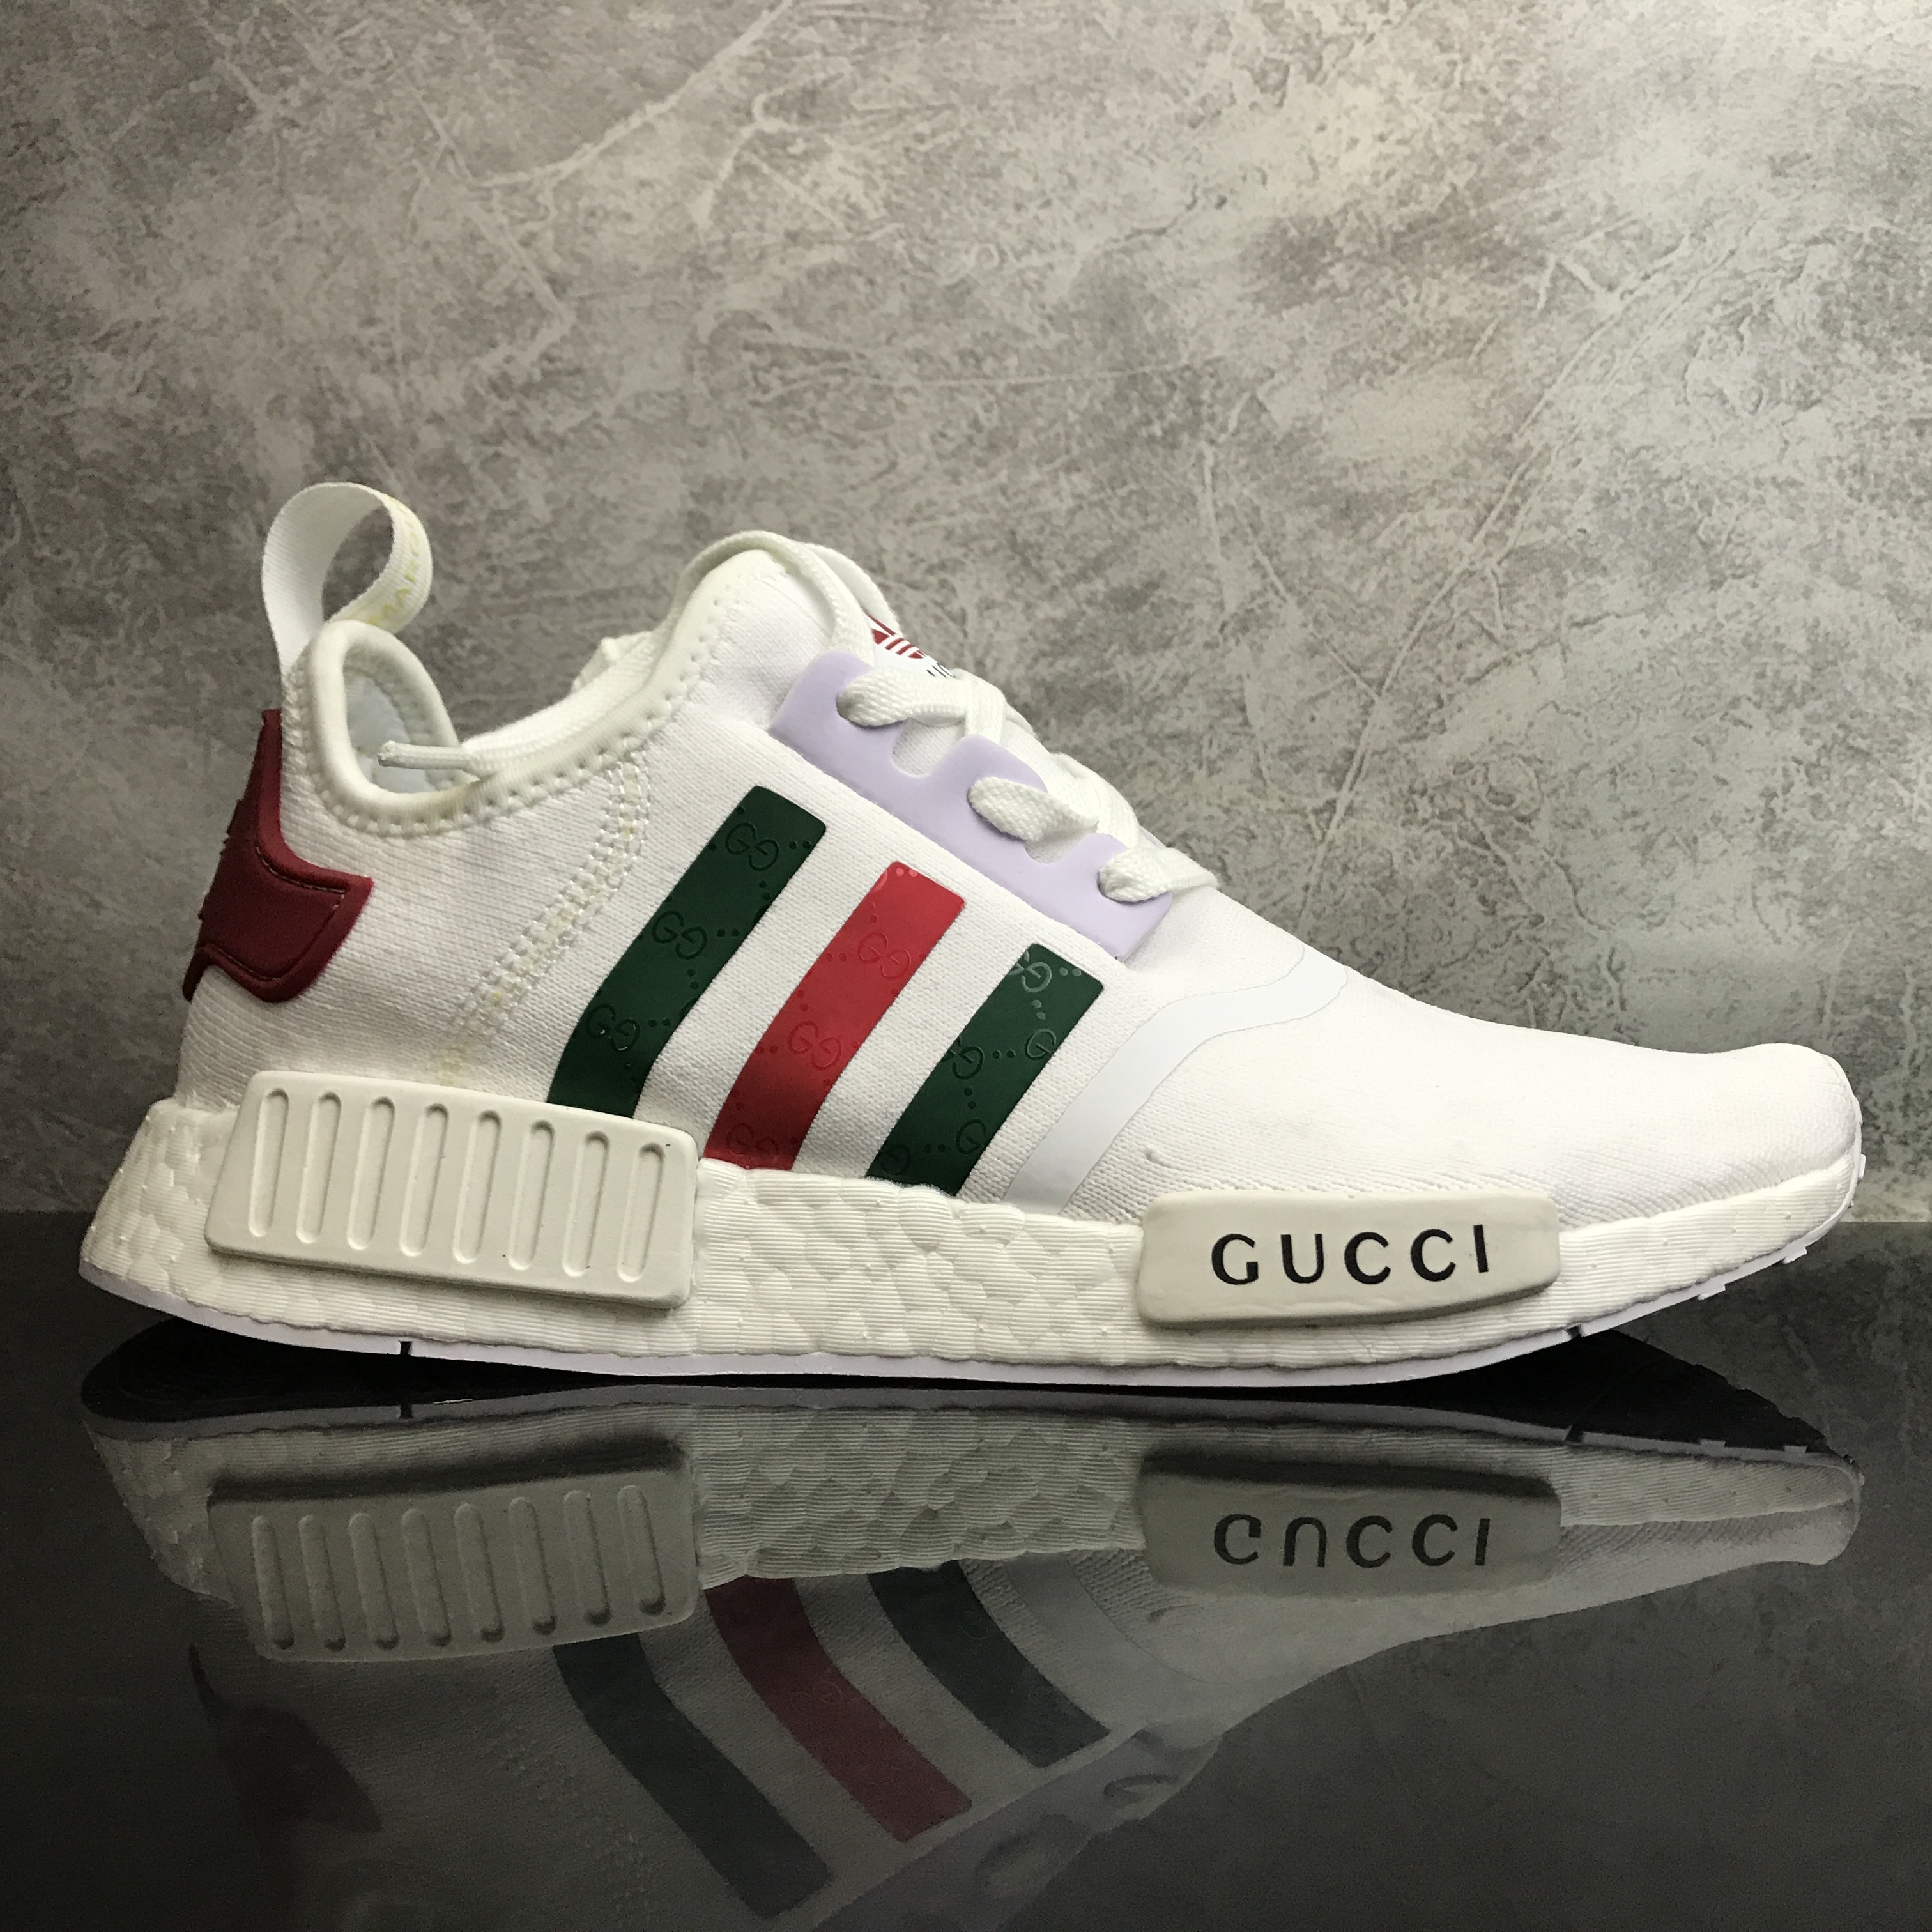 Adidas NMD R1 x Gucci Bee NMD yzyshowtop Rosablue